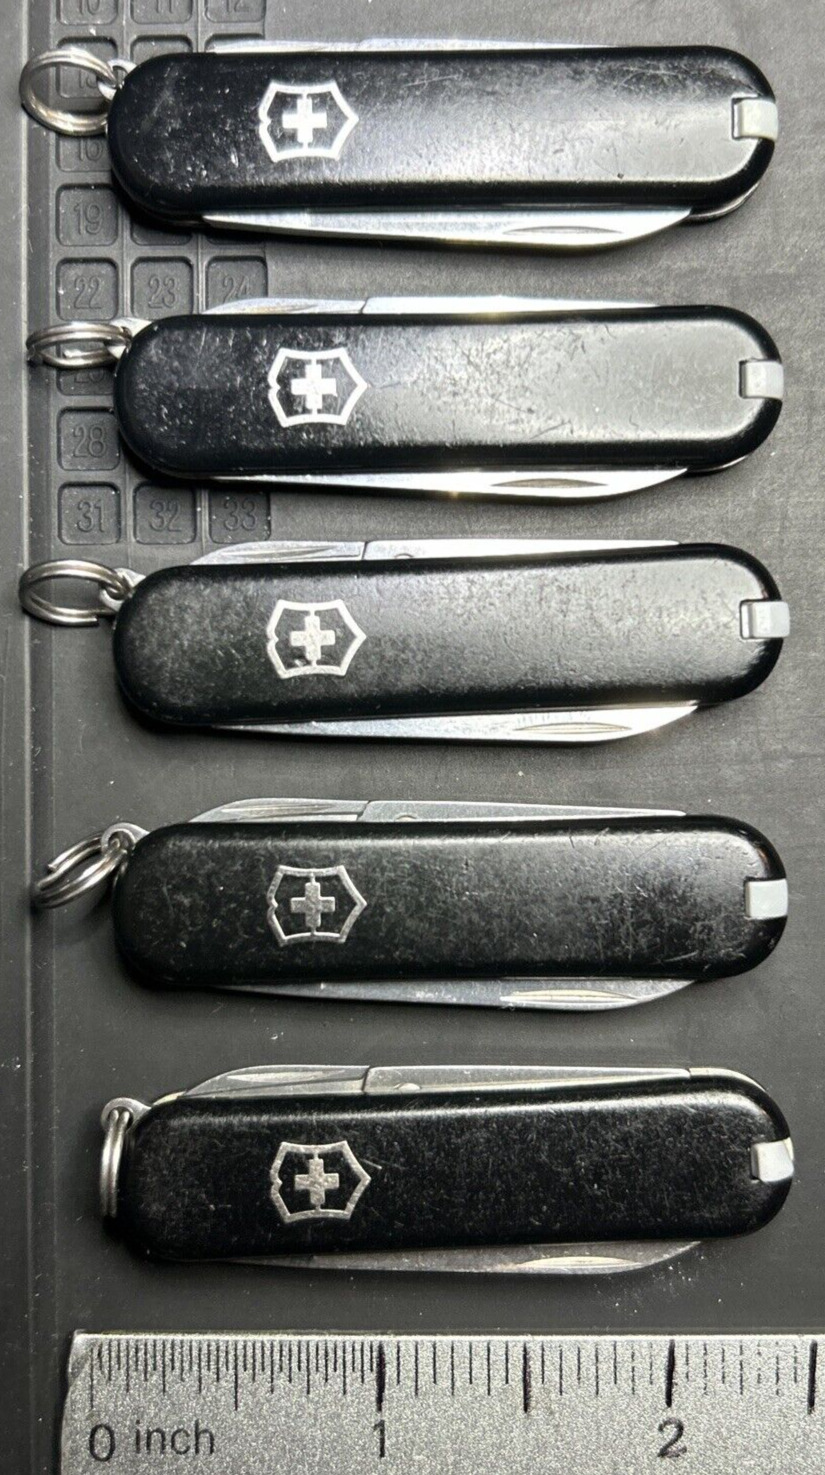 Lot of 5 Victorinox Classic SD Swiss Army Knives Black Great USED Condition